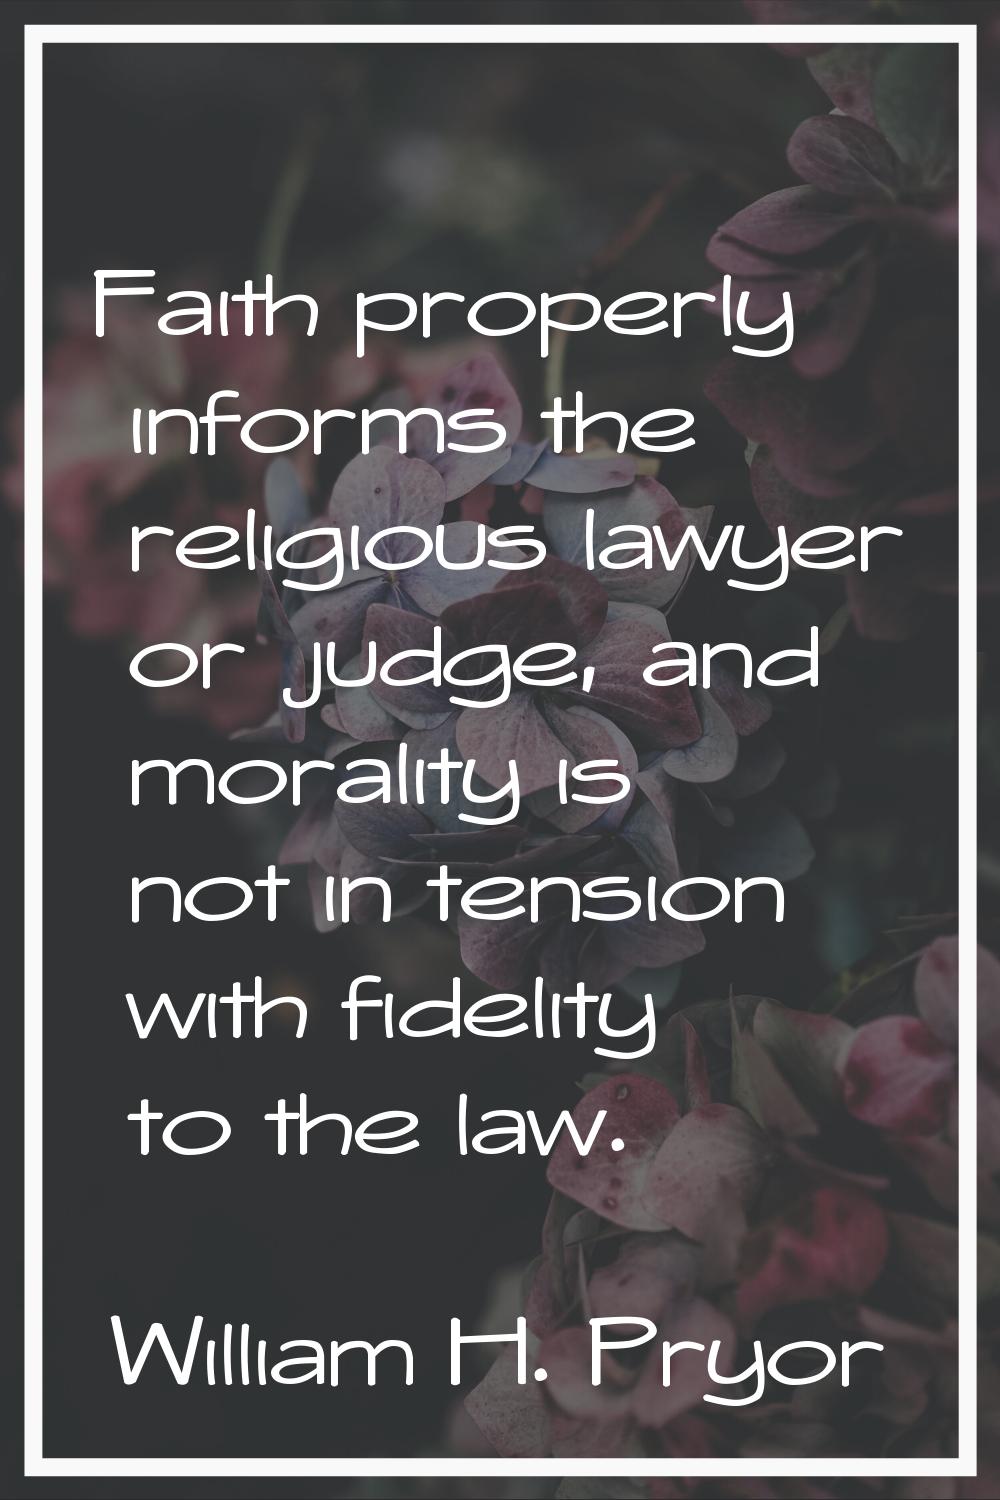 Faith properly informs the religious lawyer or judge, and morality is not in tension with fidelity 